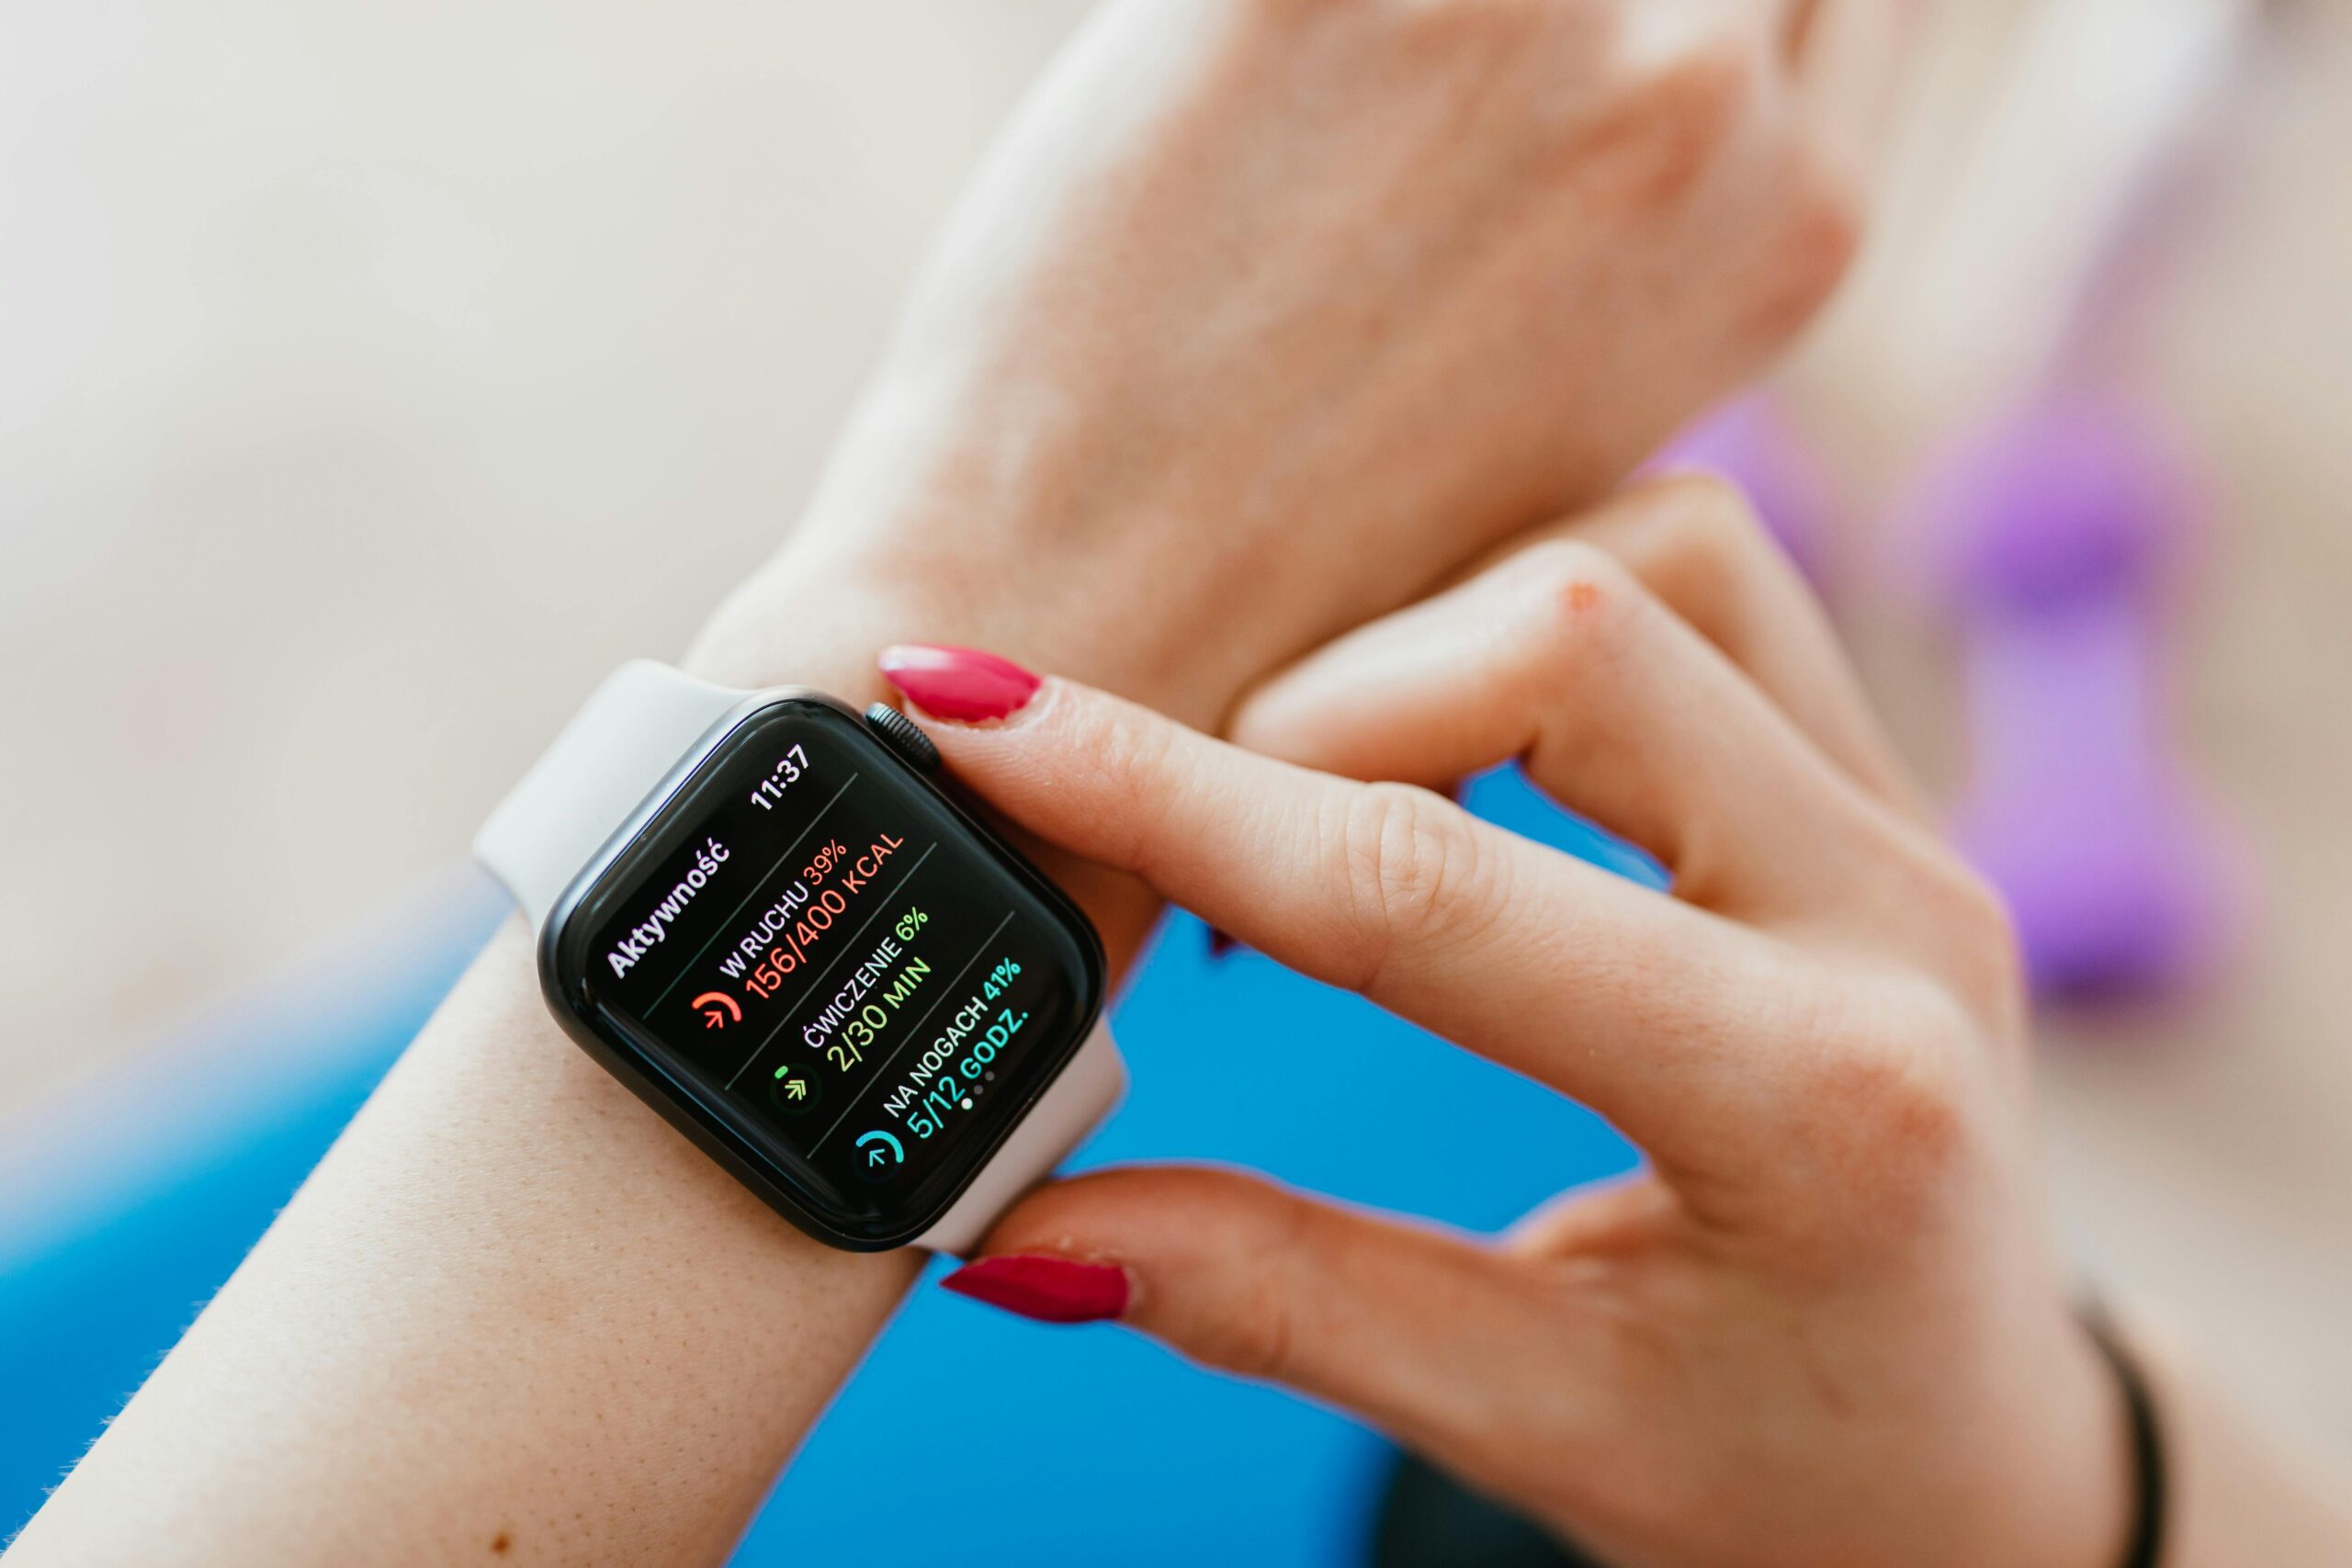 Checking fitness stats on a smart watch